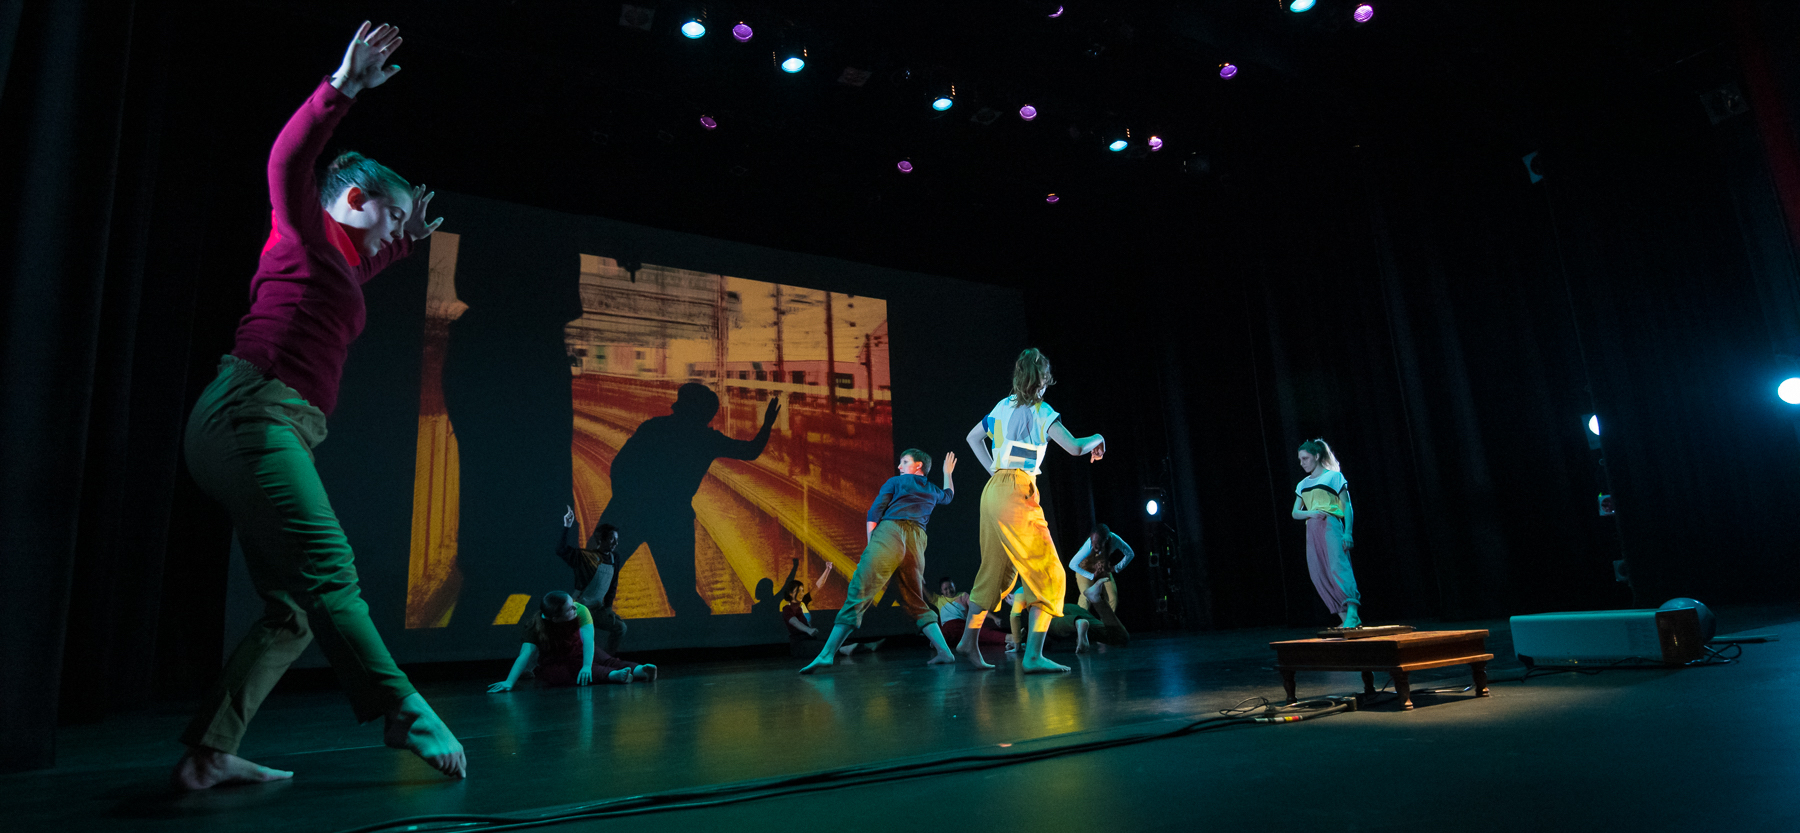 Dancers perform with projection of abstract images behind them, at the Greenberg Theatre